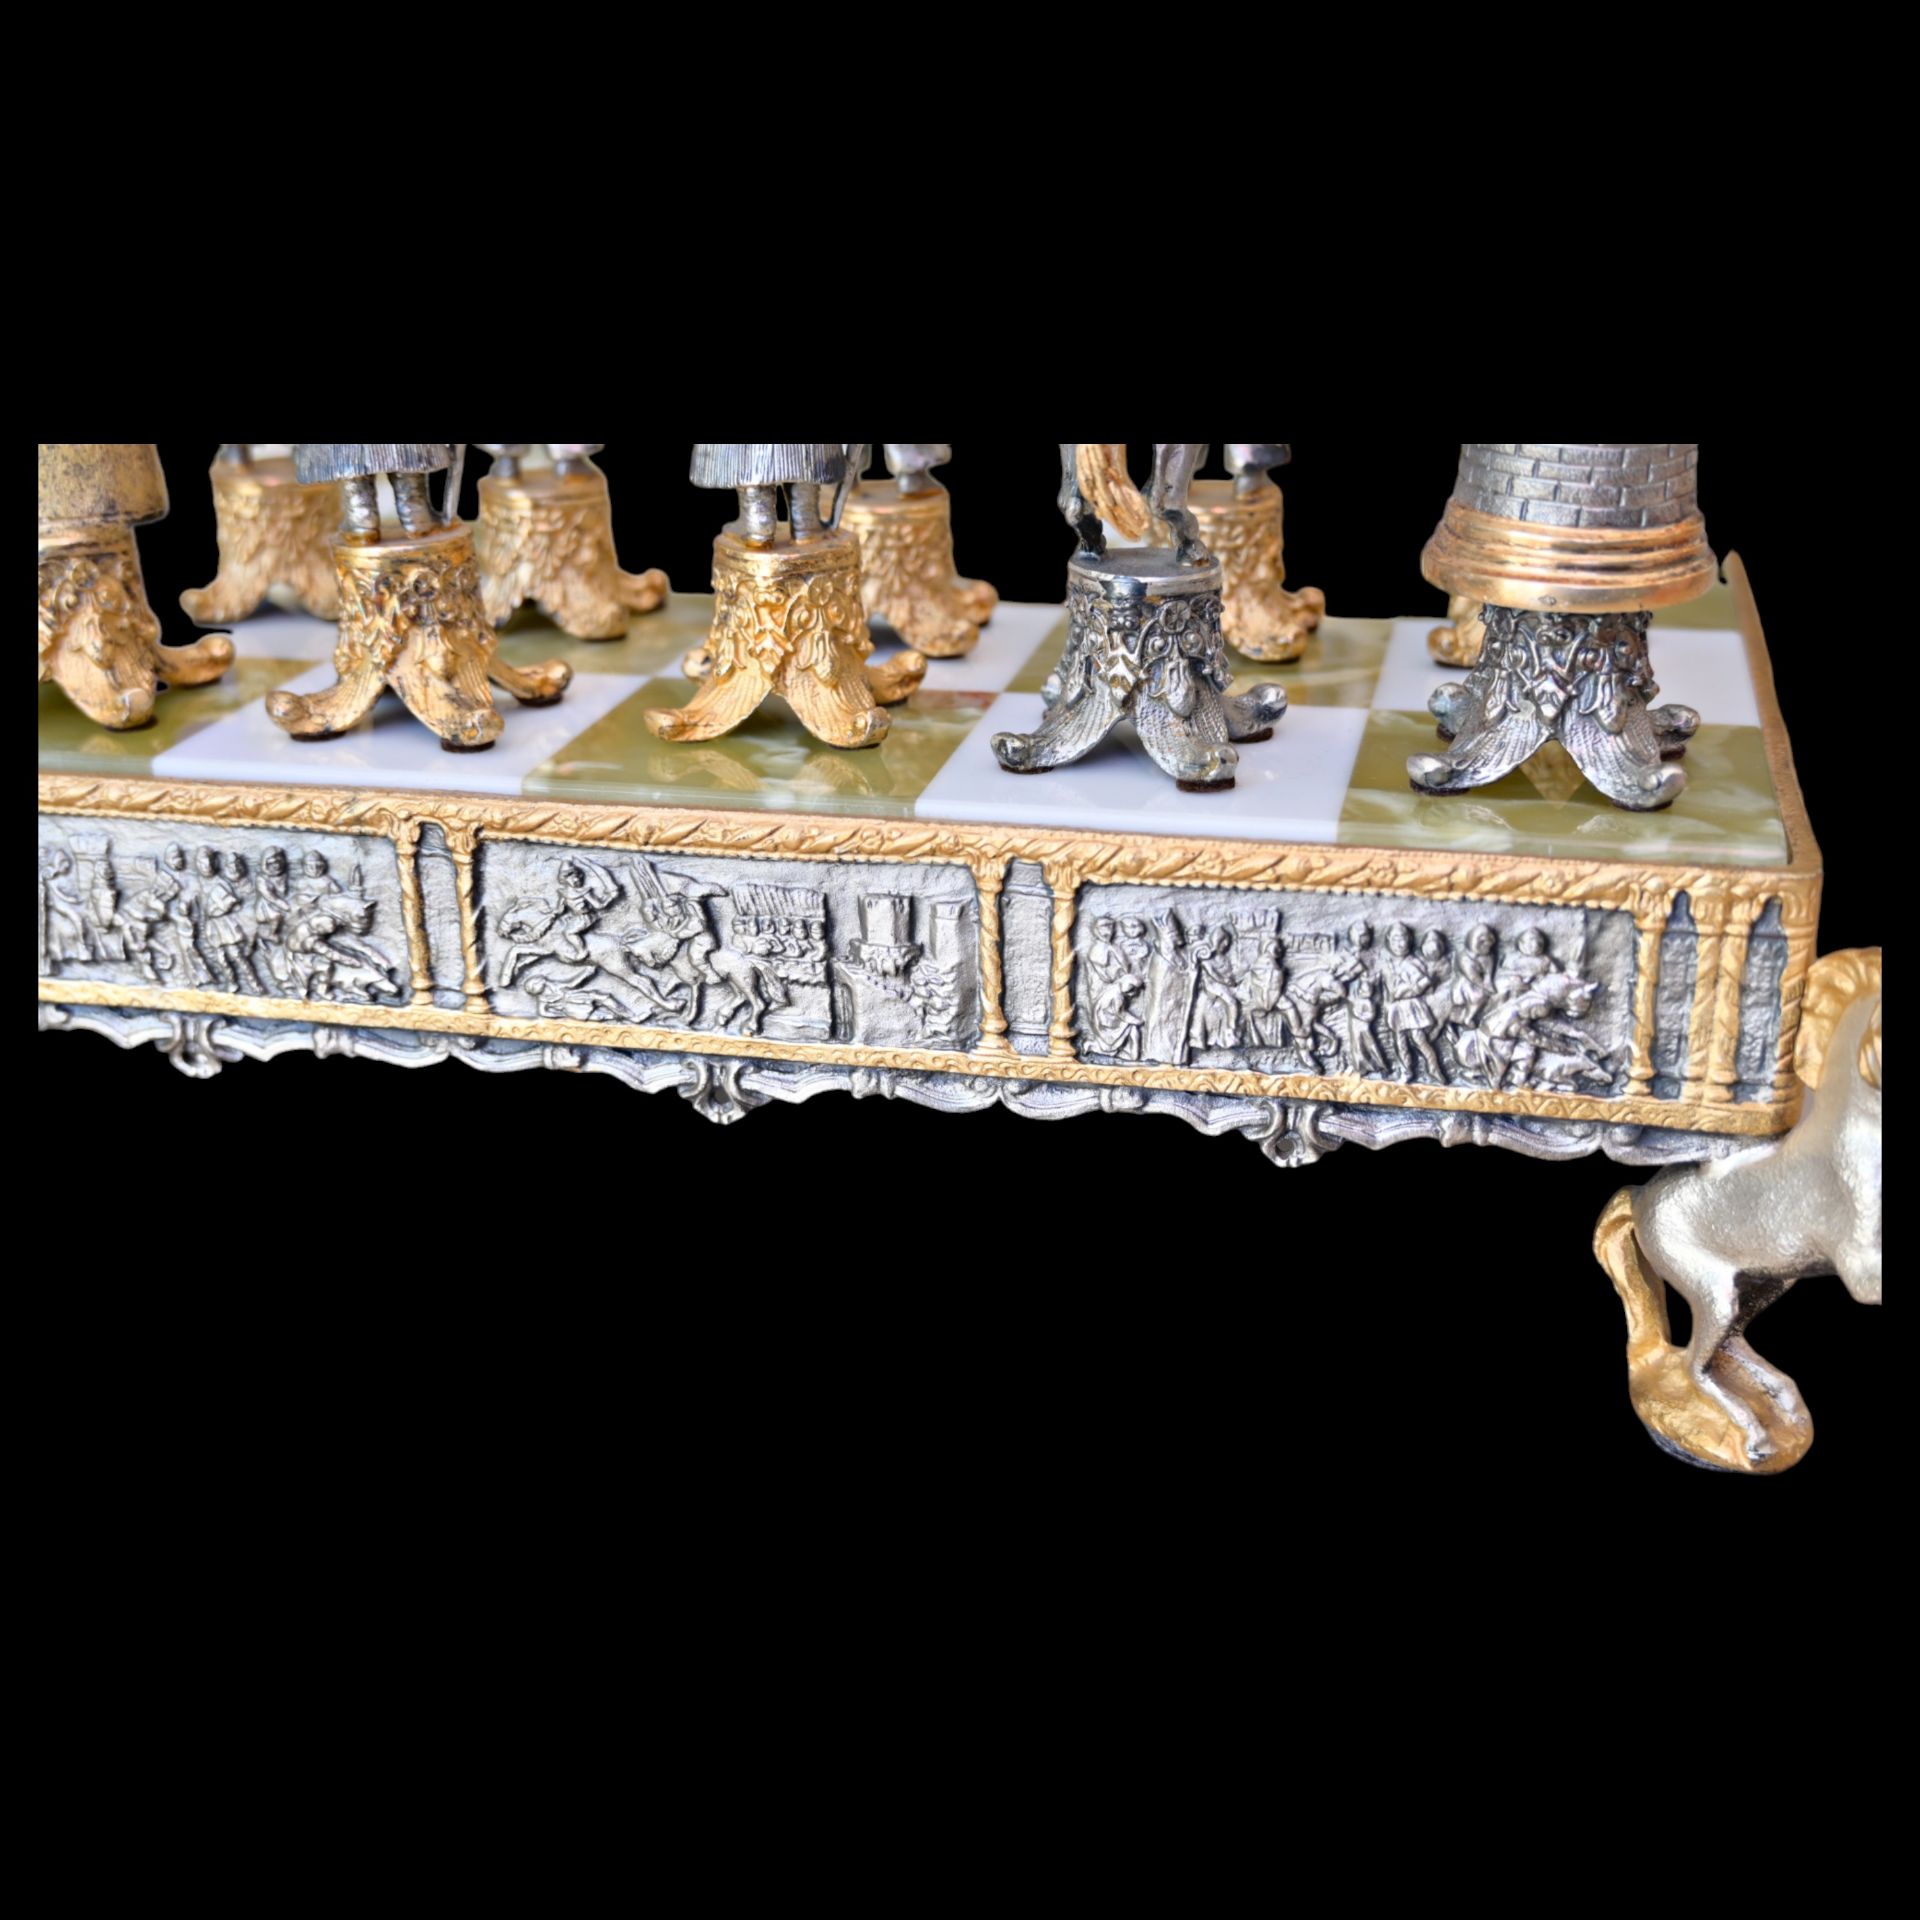 Piero Benzoni Onyx and Marble Silver-Plated and Gilt Bronze Chess Set, 70-80 years of the 20th _. - Bild 6 aus 13